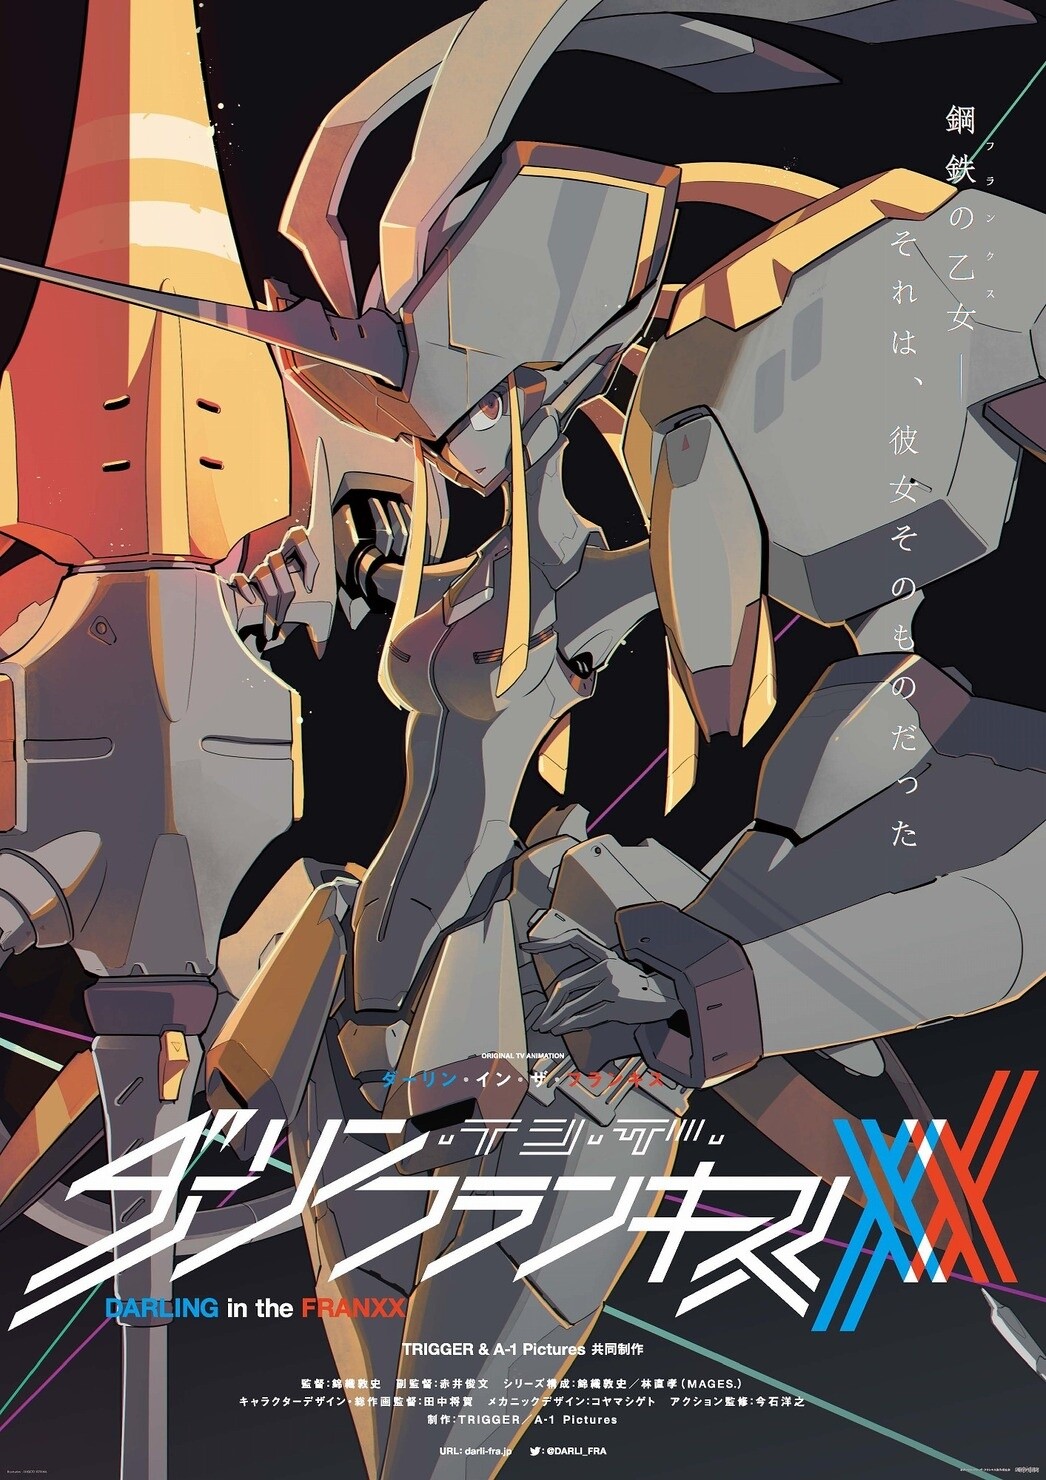 DARLING in the FRANXX Receives New Trailer and Key Visual! | Anime